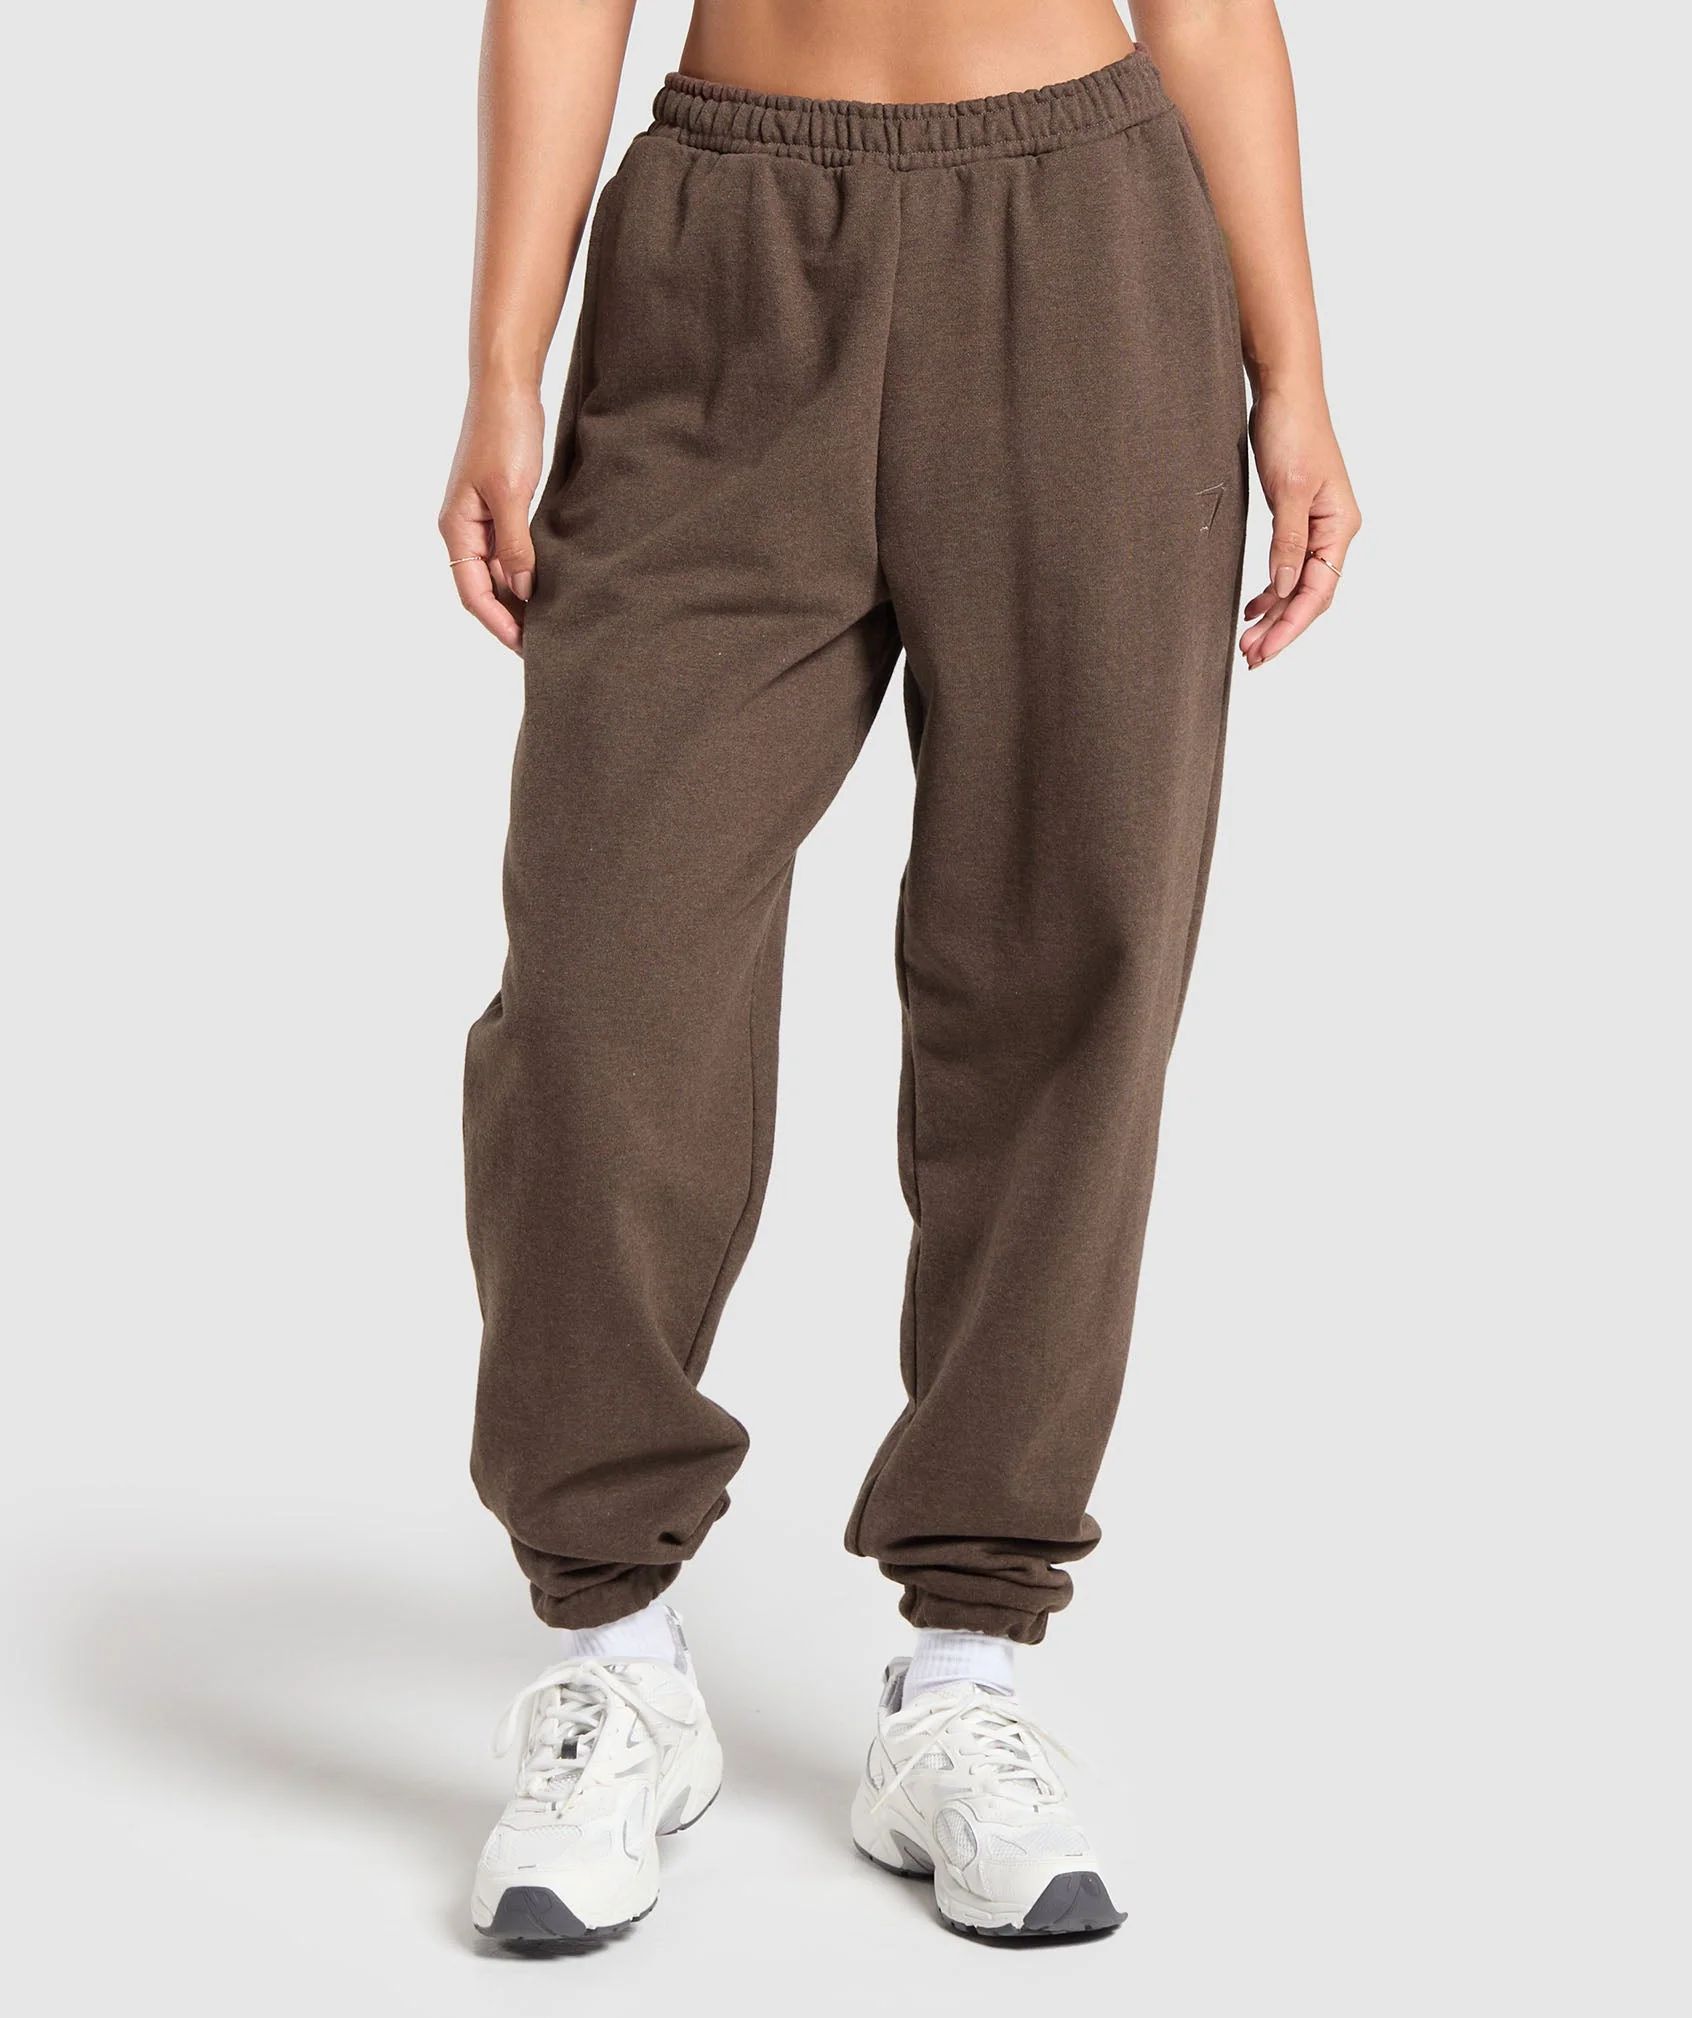 Gymshark Rest Day Sweats Joggers - Cozy Brown Marl | Gymshark US